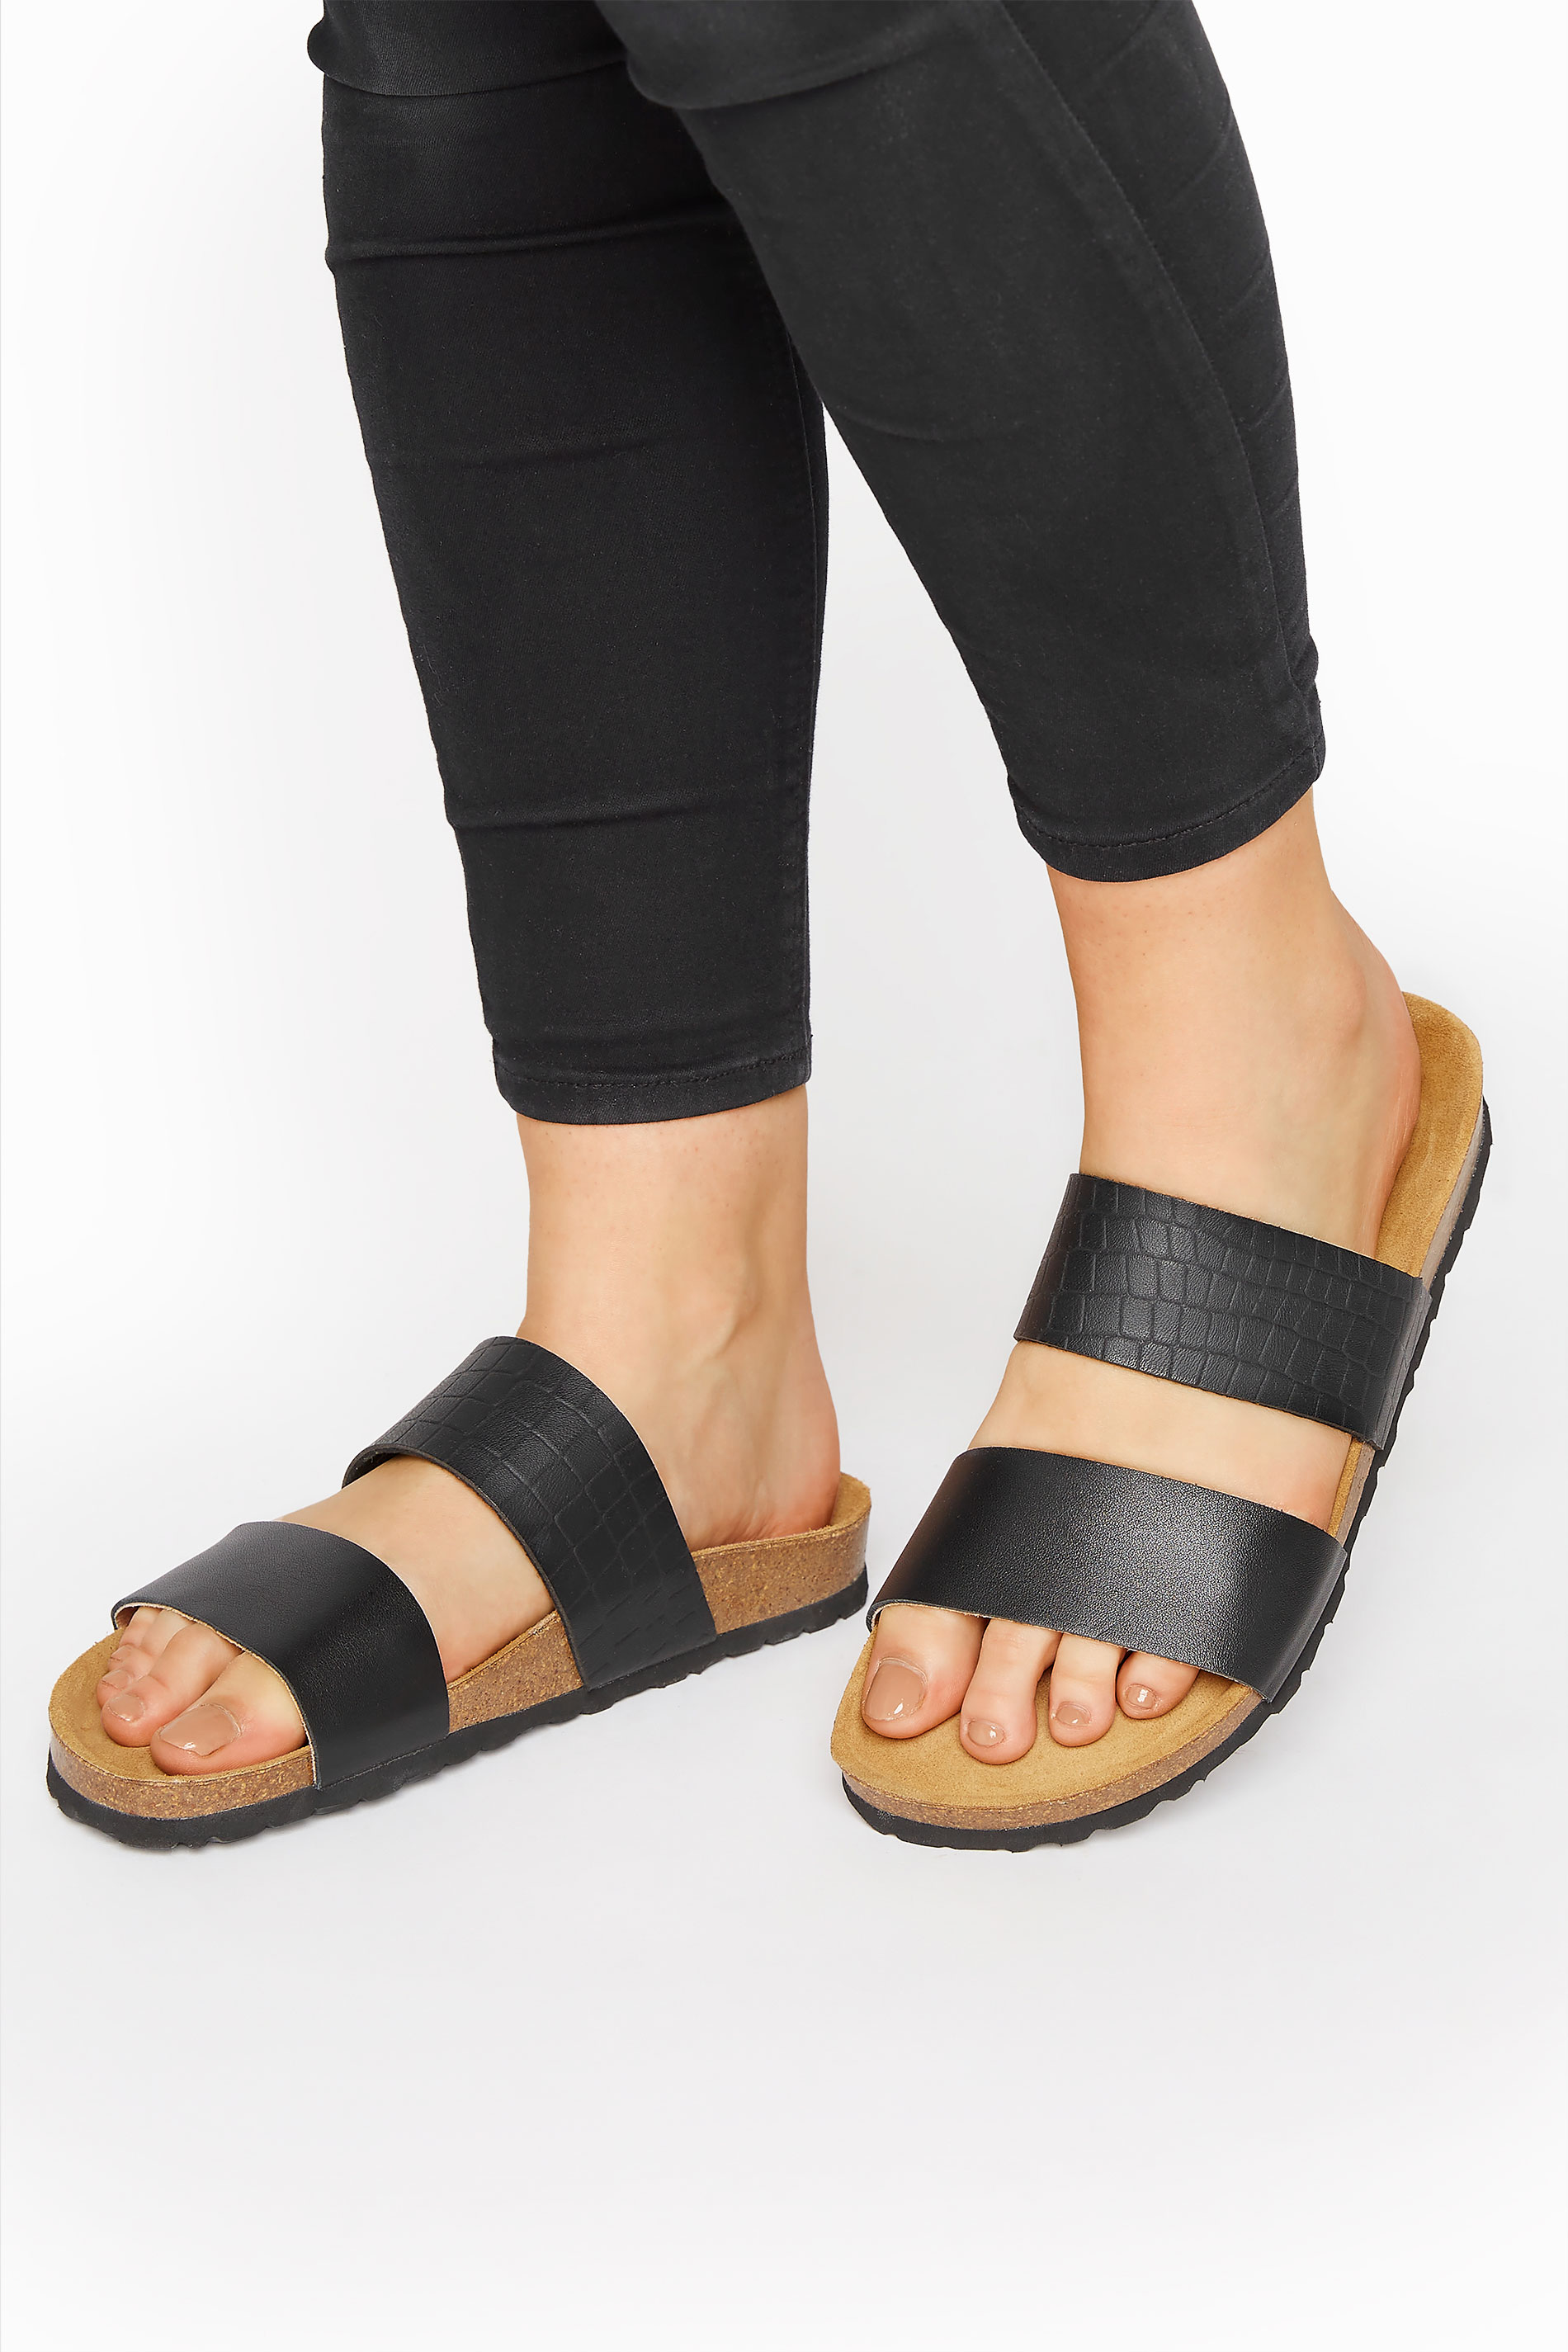 LTS Black Leather Two Strap Footbed Sandals In Standard Fit | Long Tall Sally  1